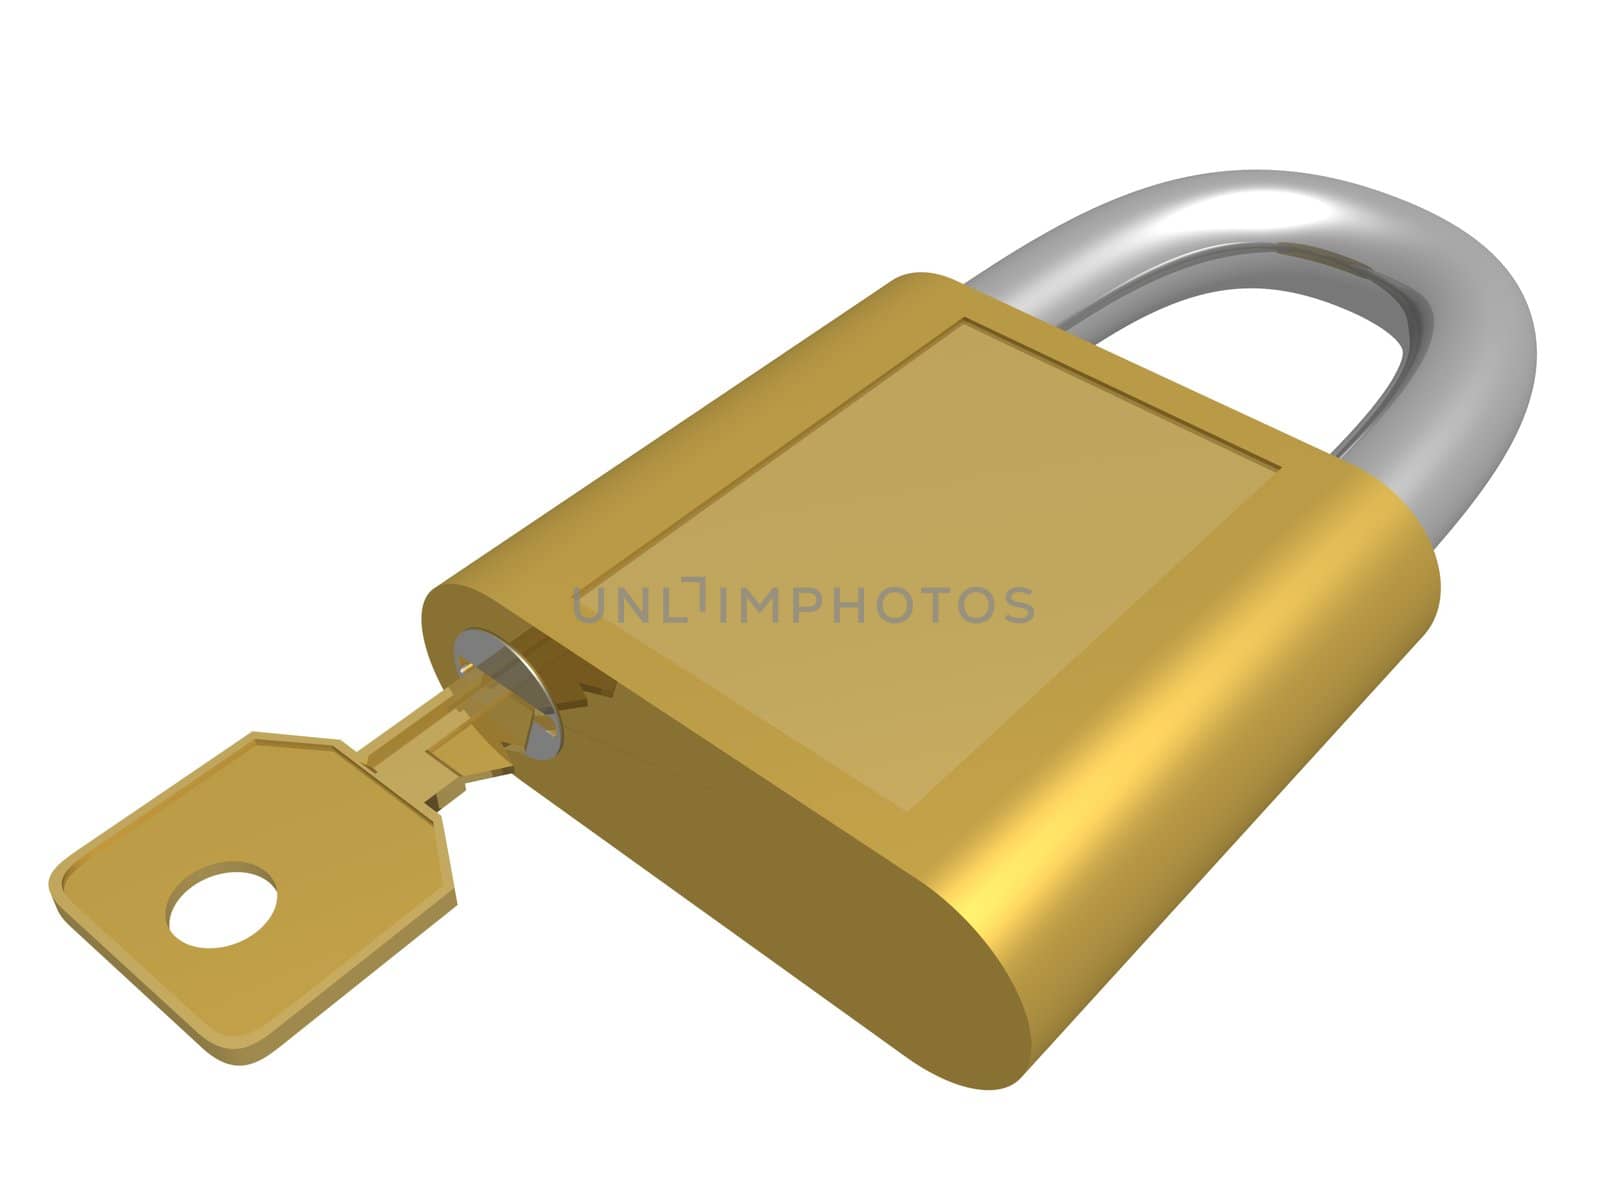 The closed lock with key. 3D object.